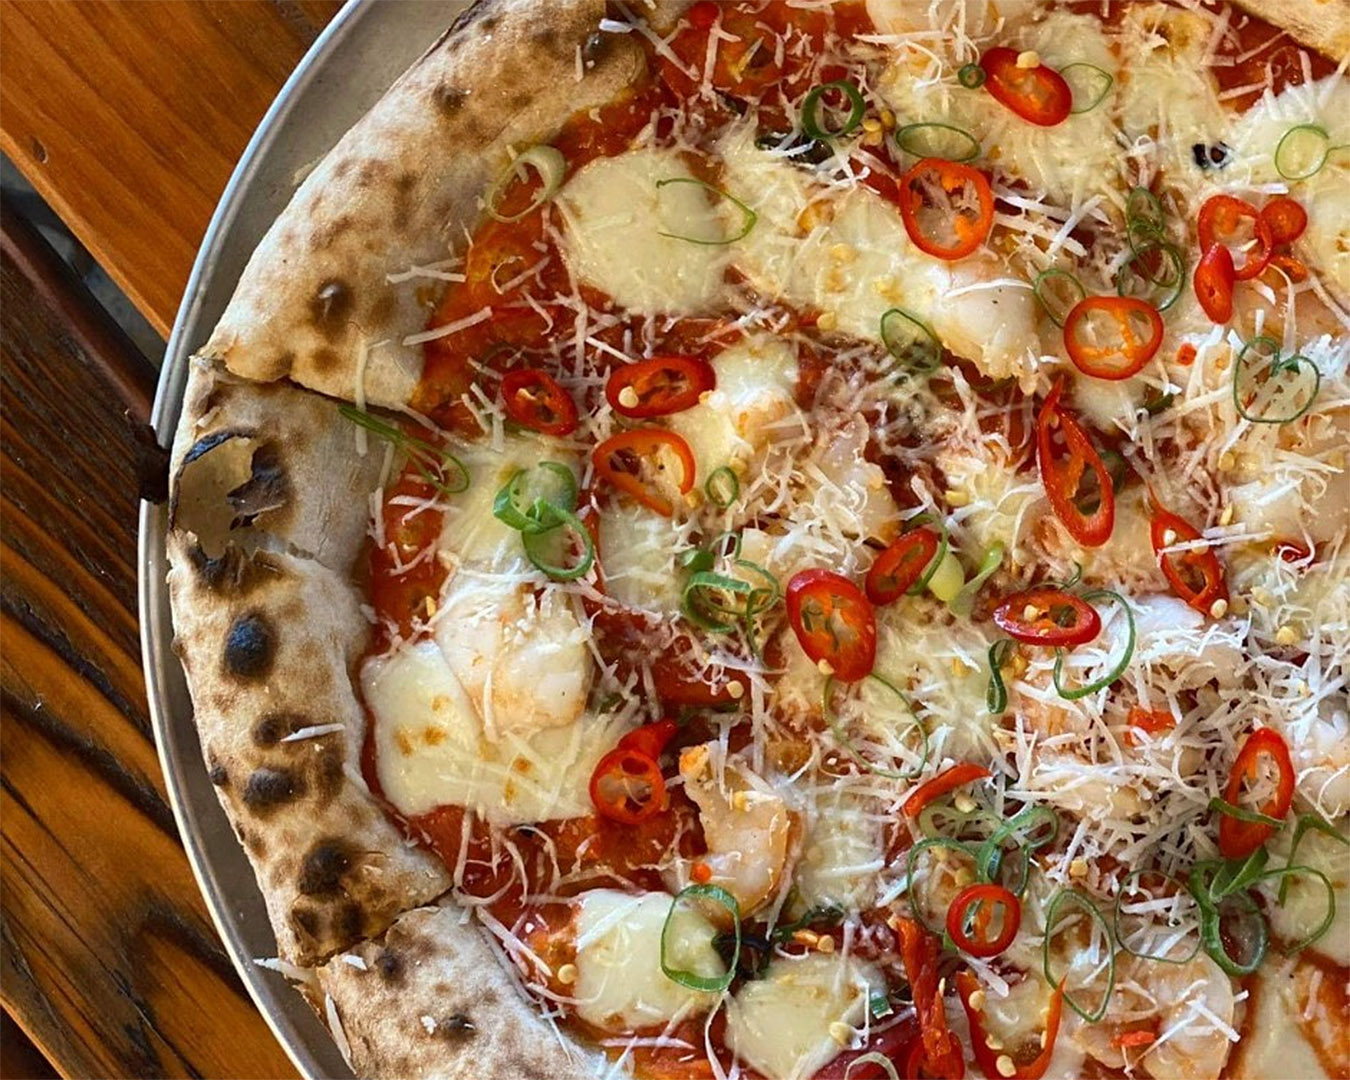 A delicious Chilli Prawn Pizza fresh from the pizza oven at The Freeport, one of the best restaurants in Tauranga and the mount.